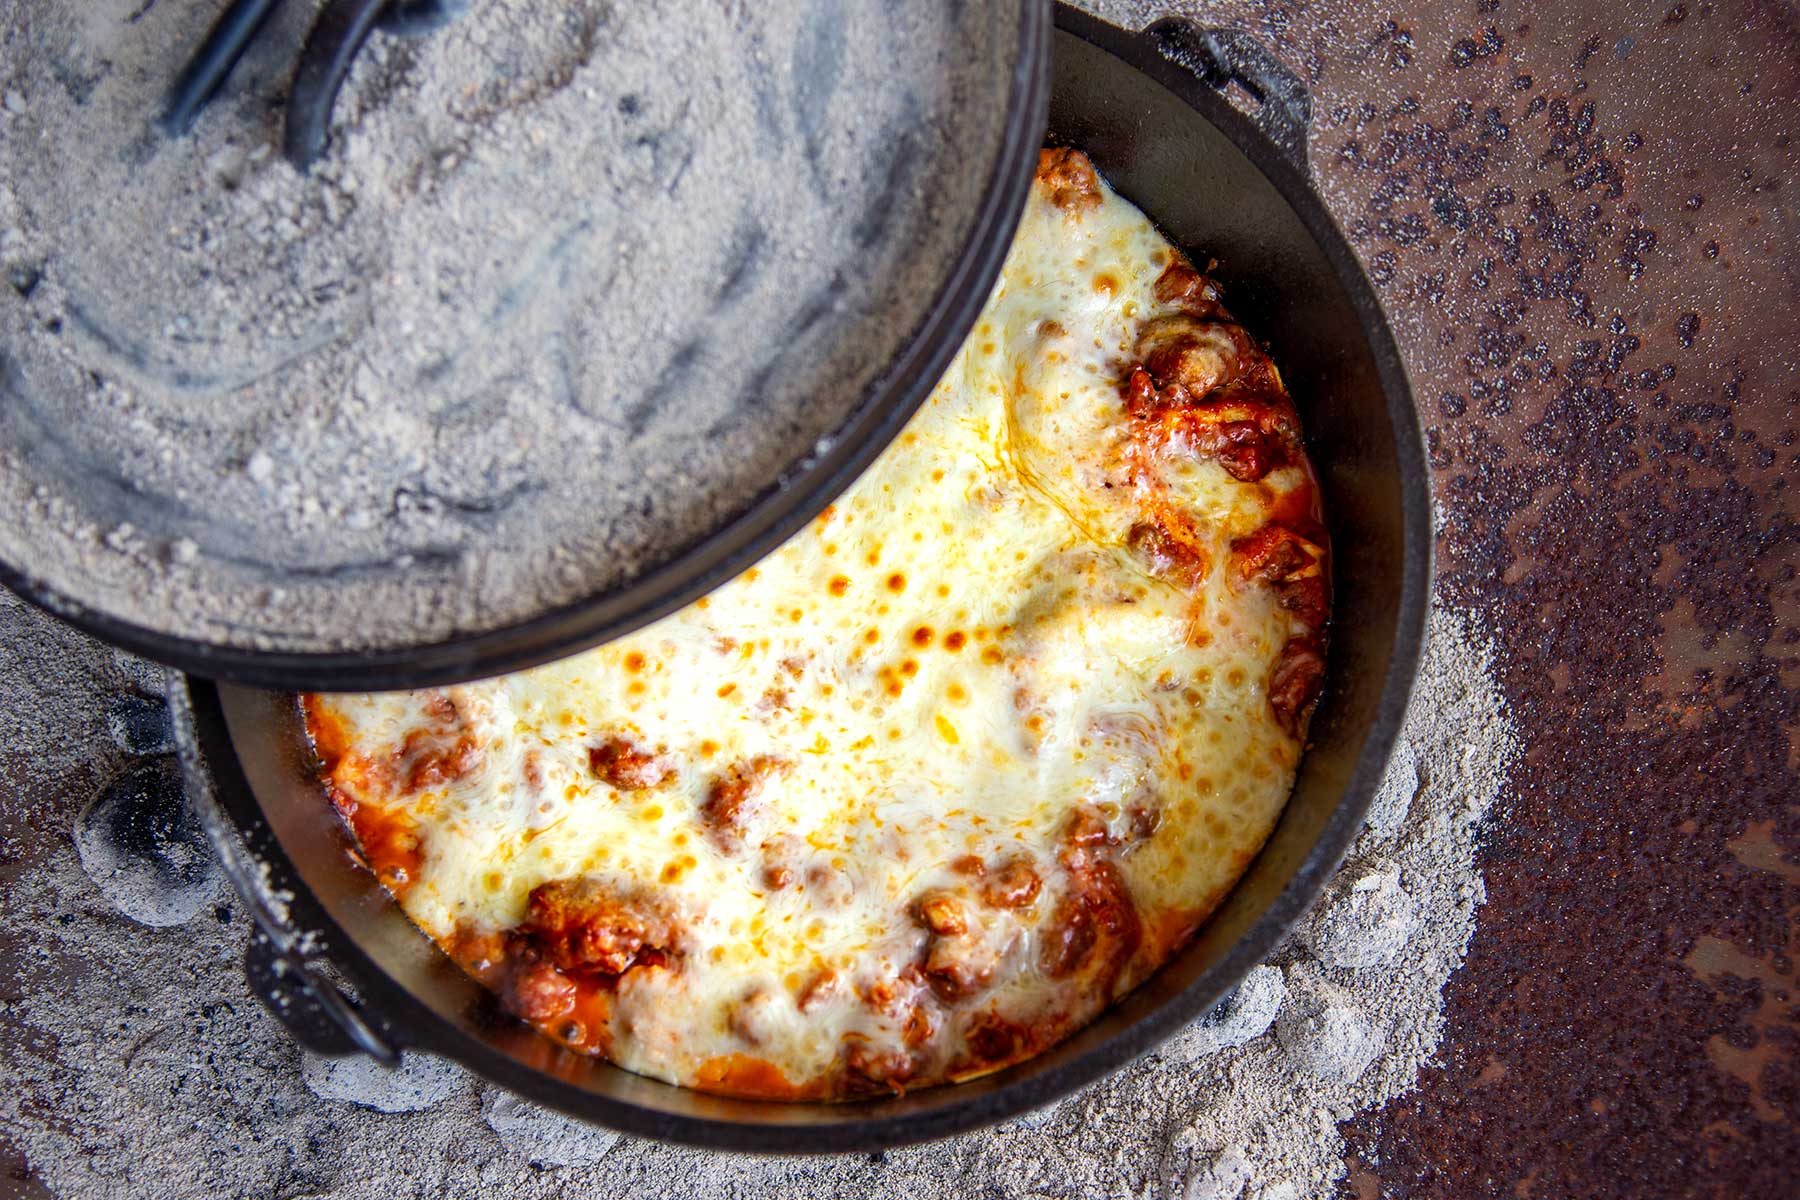 Dutch Oven Recipes for Camping Trips